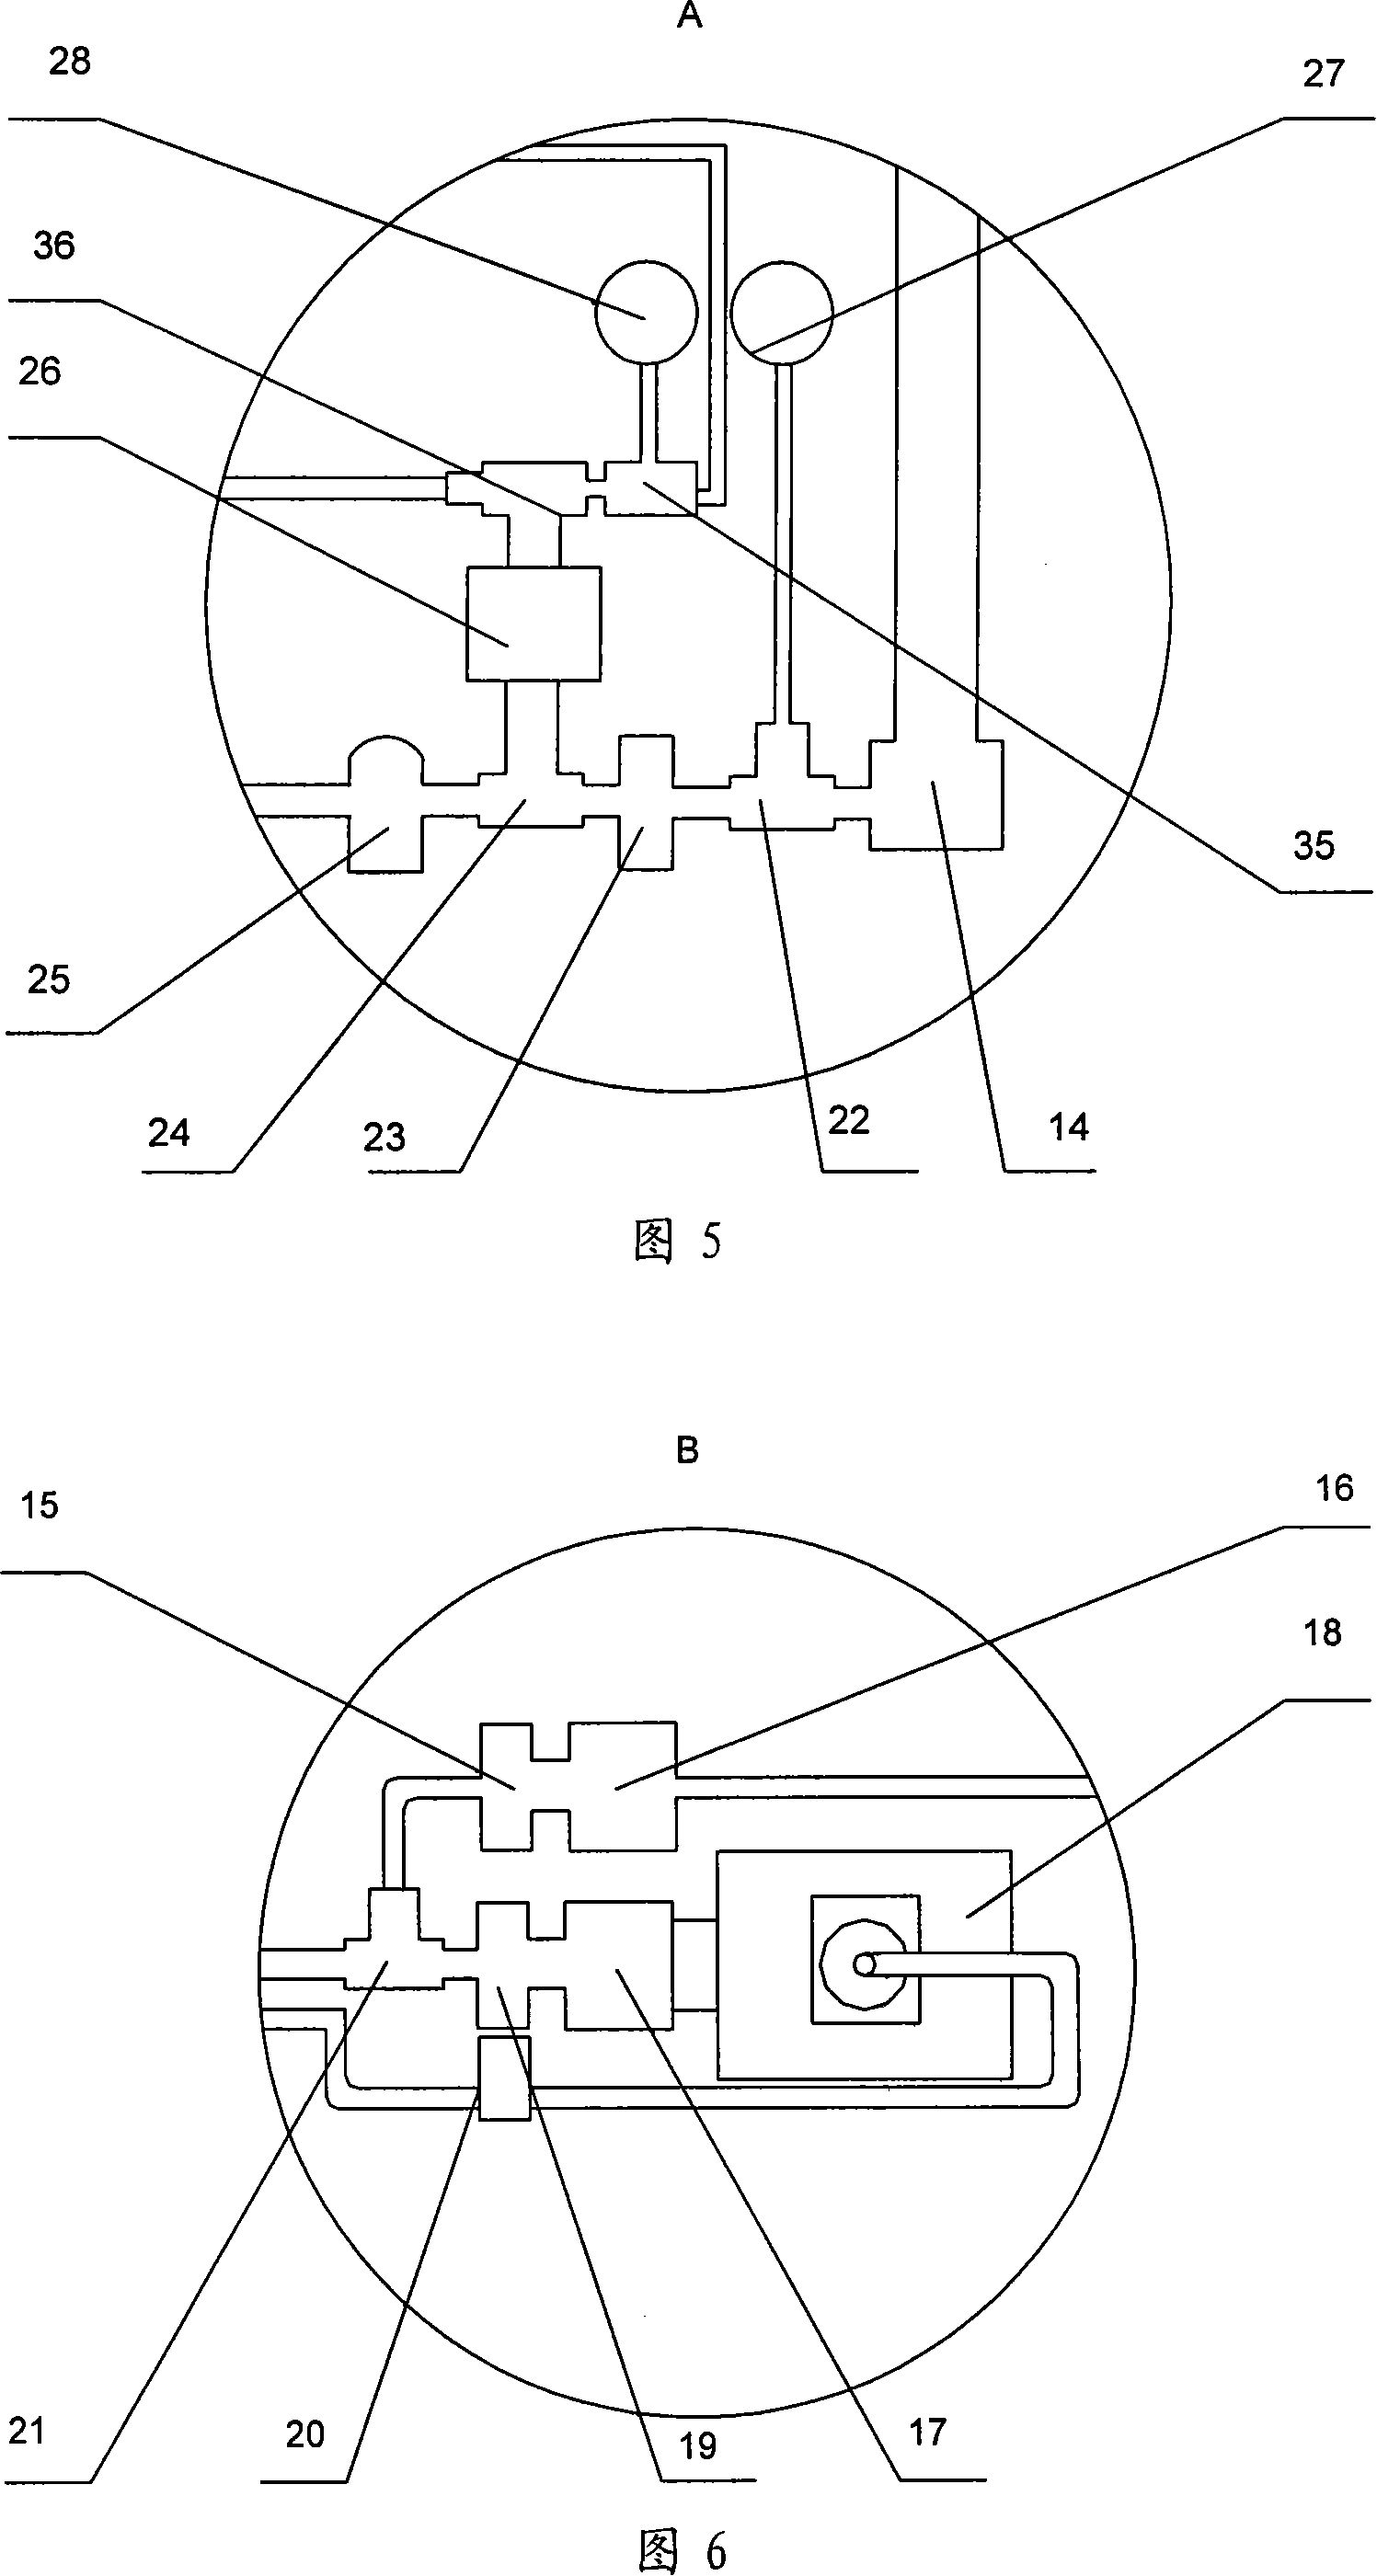 Mobile fertilizing and chemical spraying integrated device